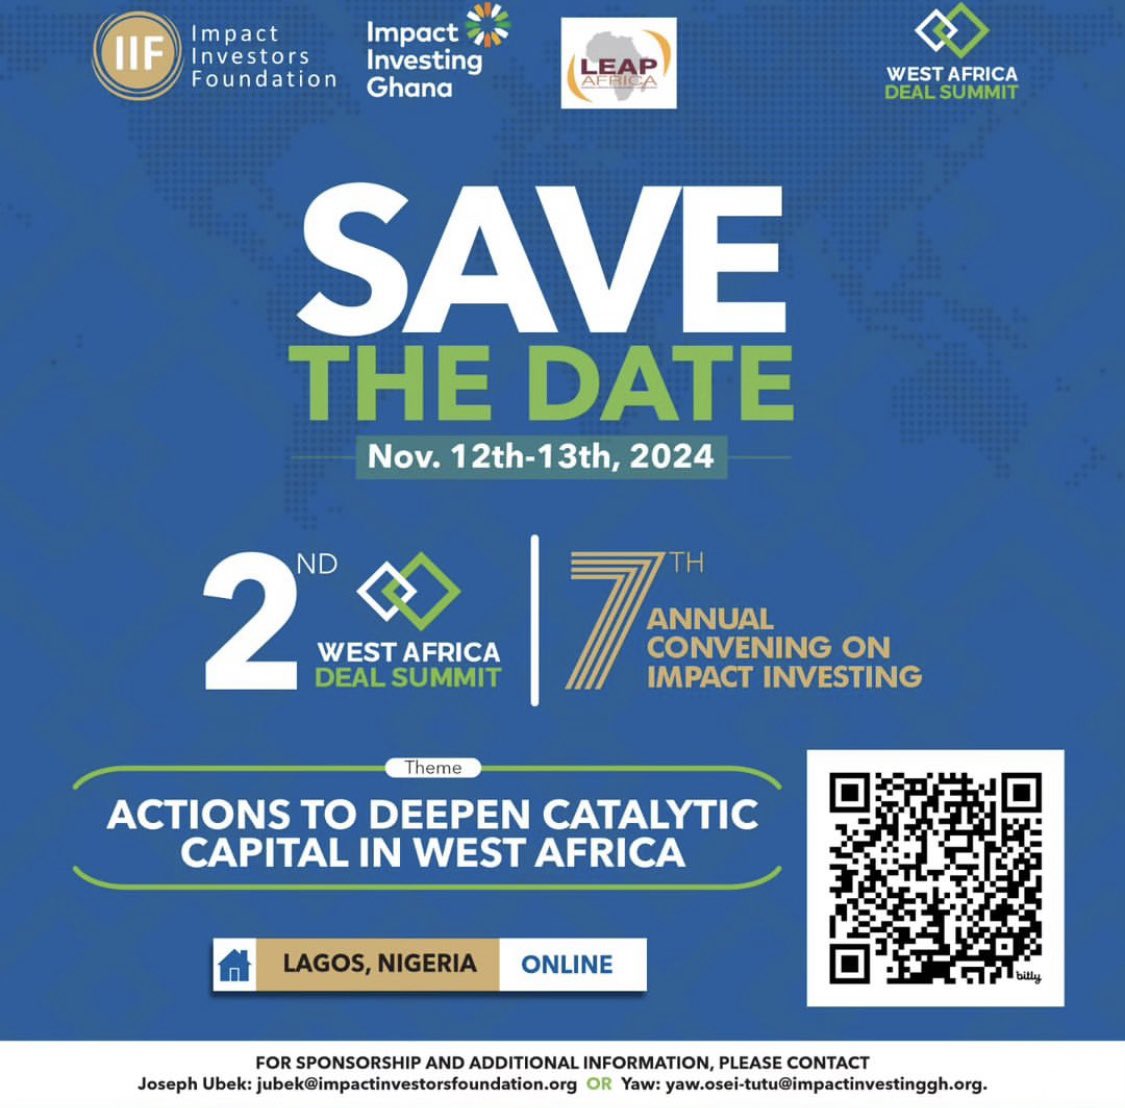 Excited to announce our partnership with IIF for the upcoming #WADS2024! SAVE THE DATE! Together, we're committed to empowering youth across Africa, igniting their potential, and fostering positive change. #WADS2024 #YouthEmpowerment #Partnership